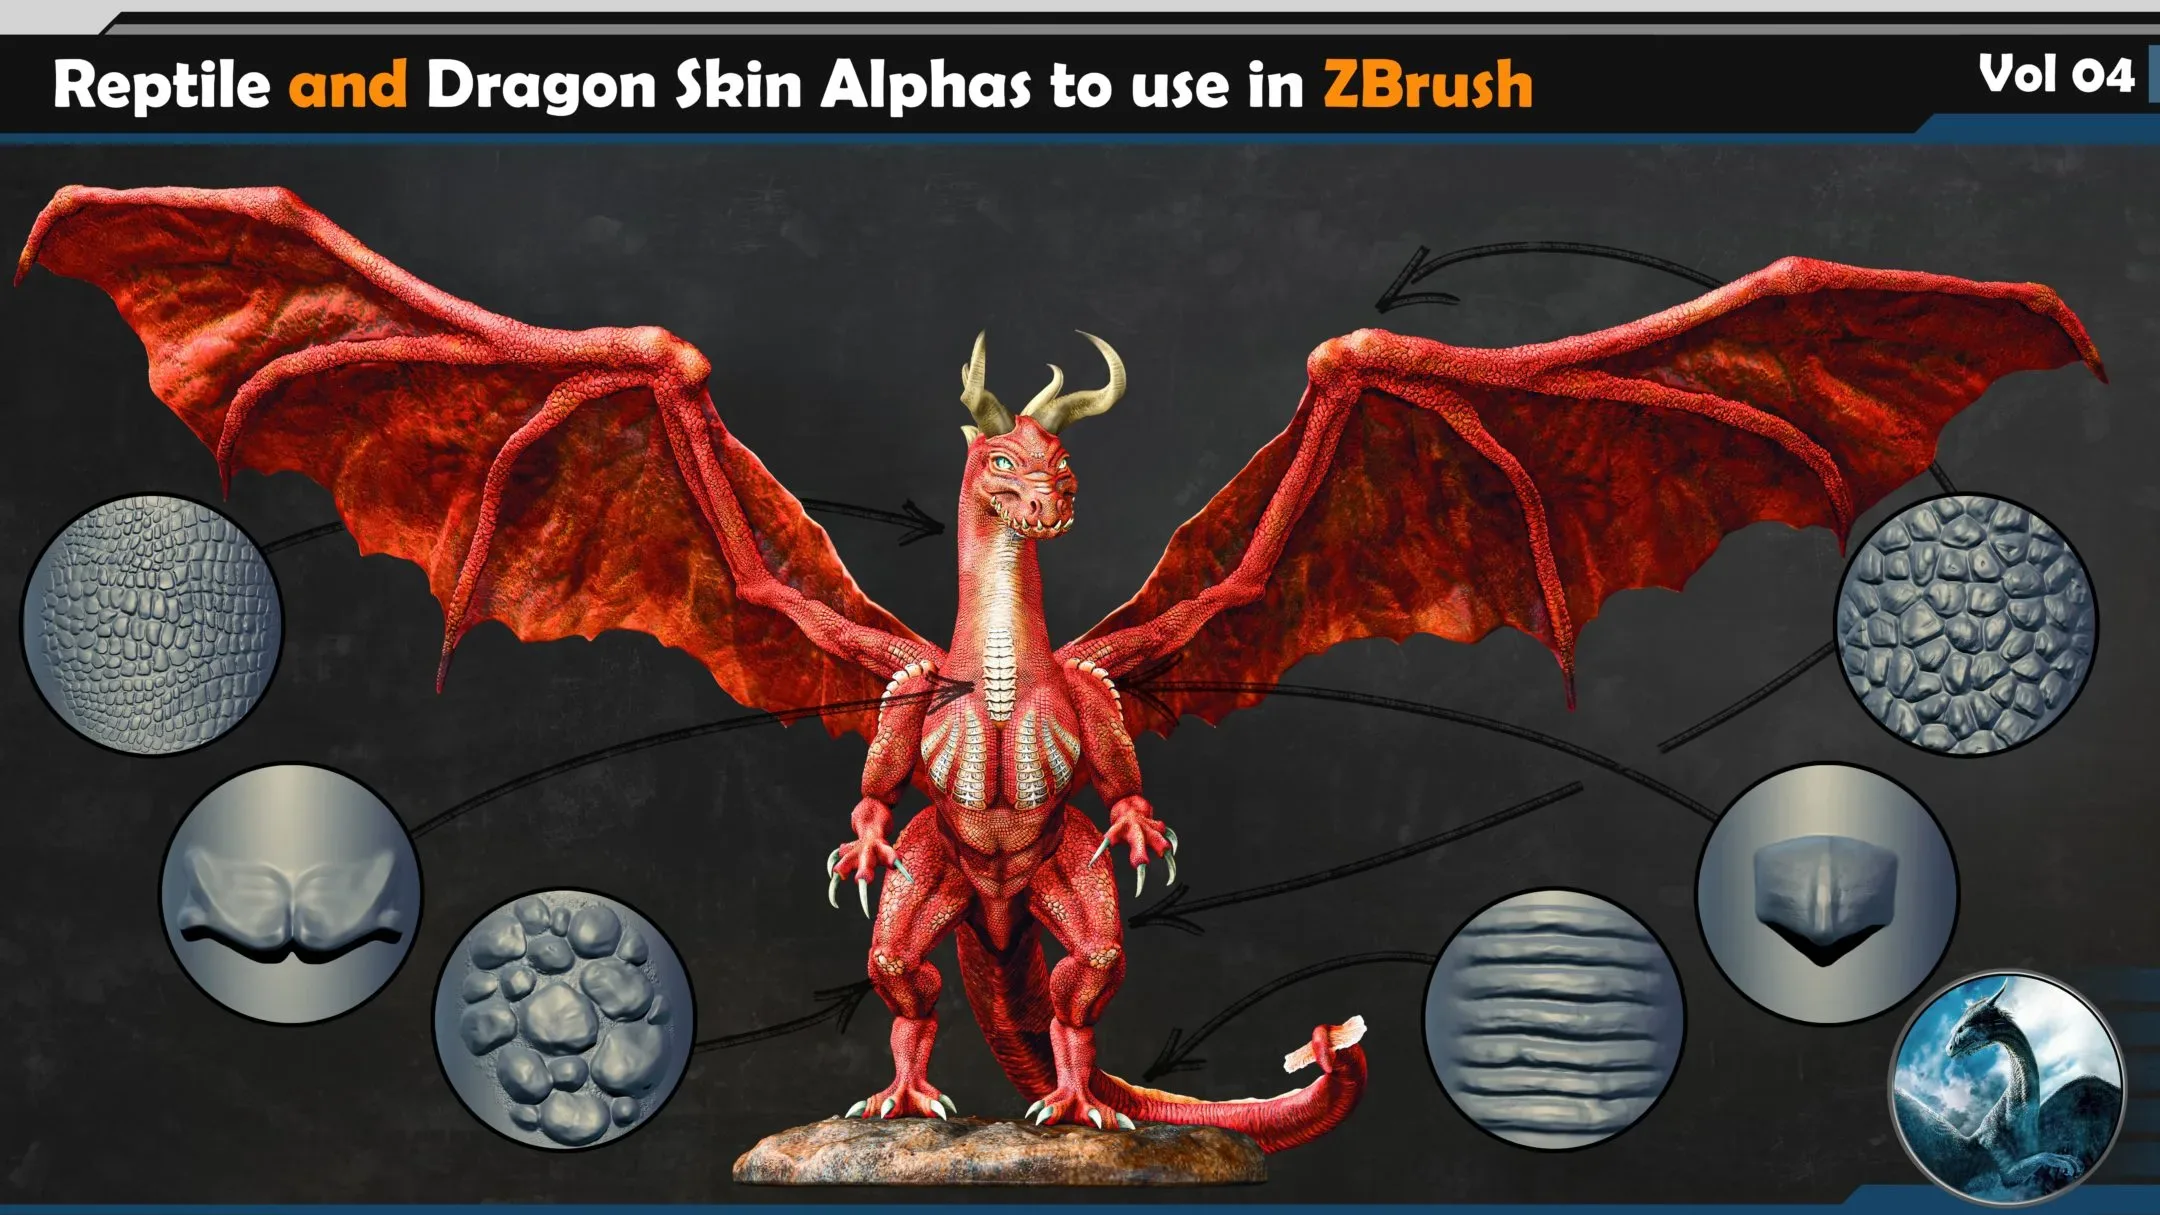 135 Reptile and Dragon Skin Brushes/Alphas Bundle (30% OFF)